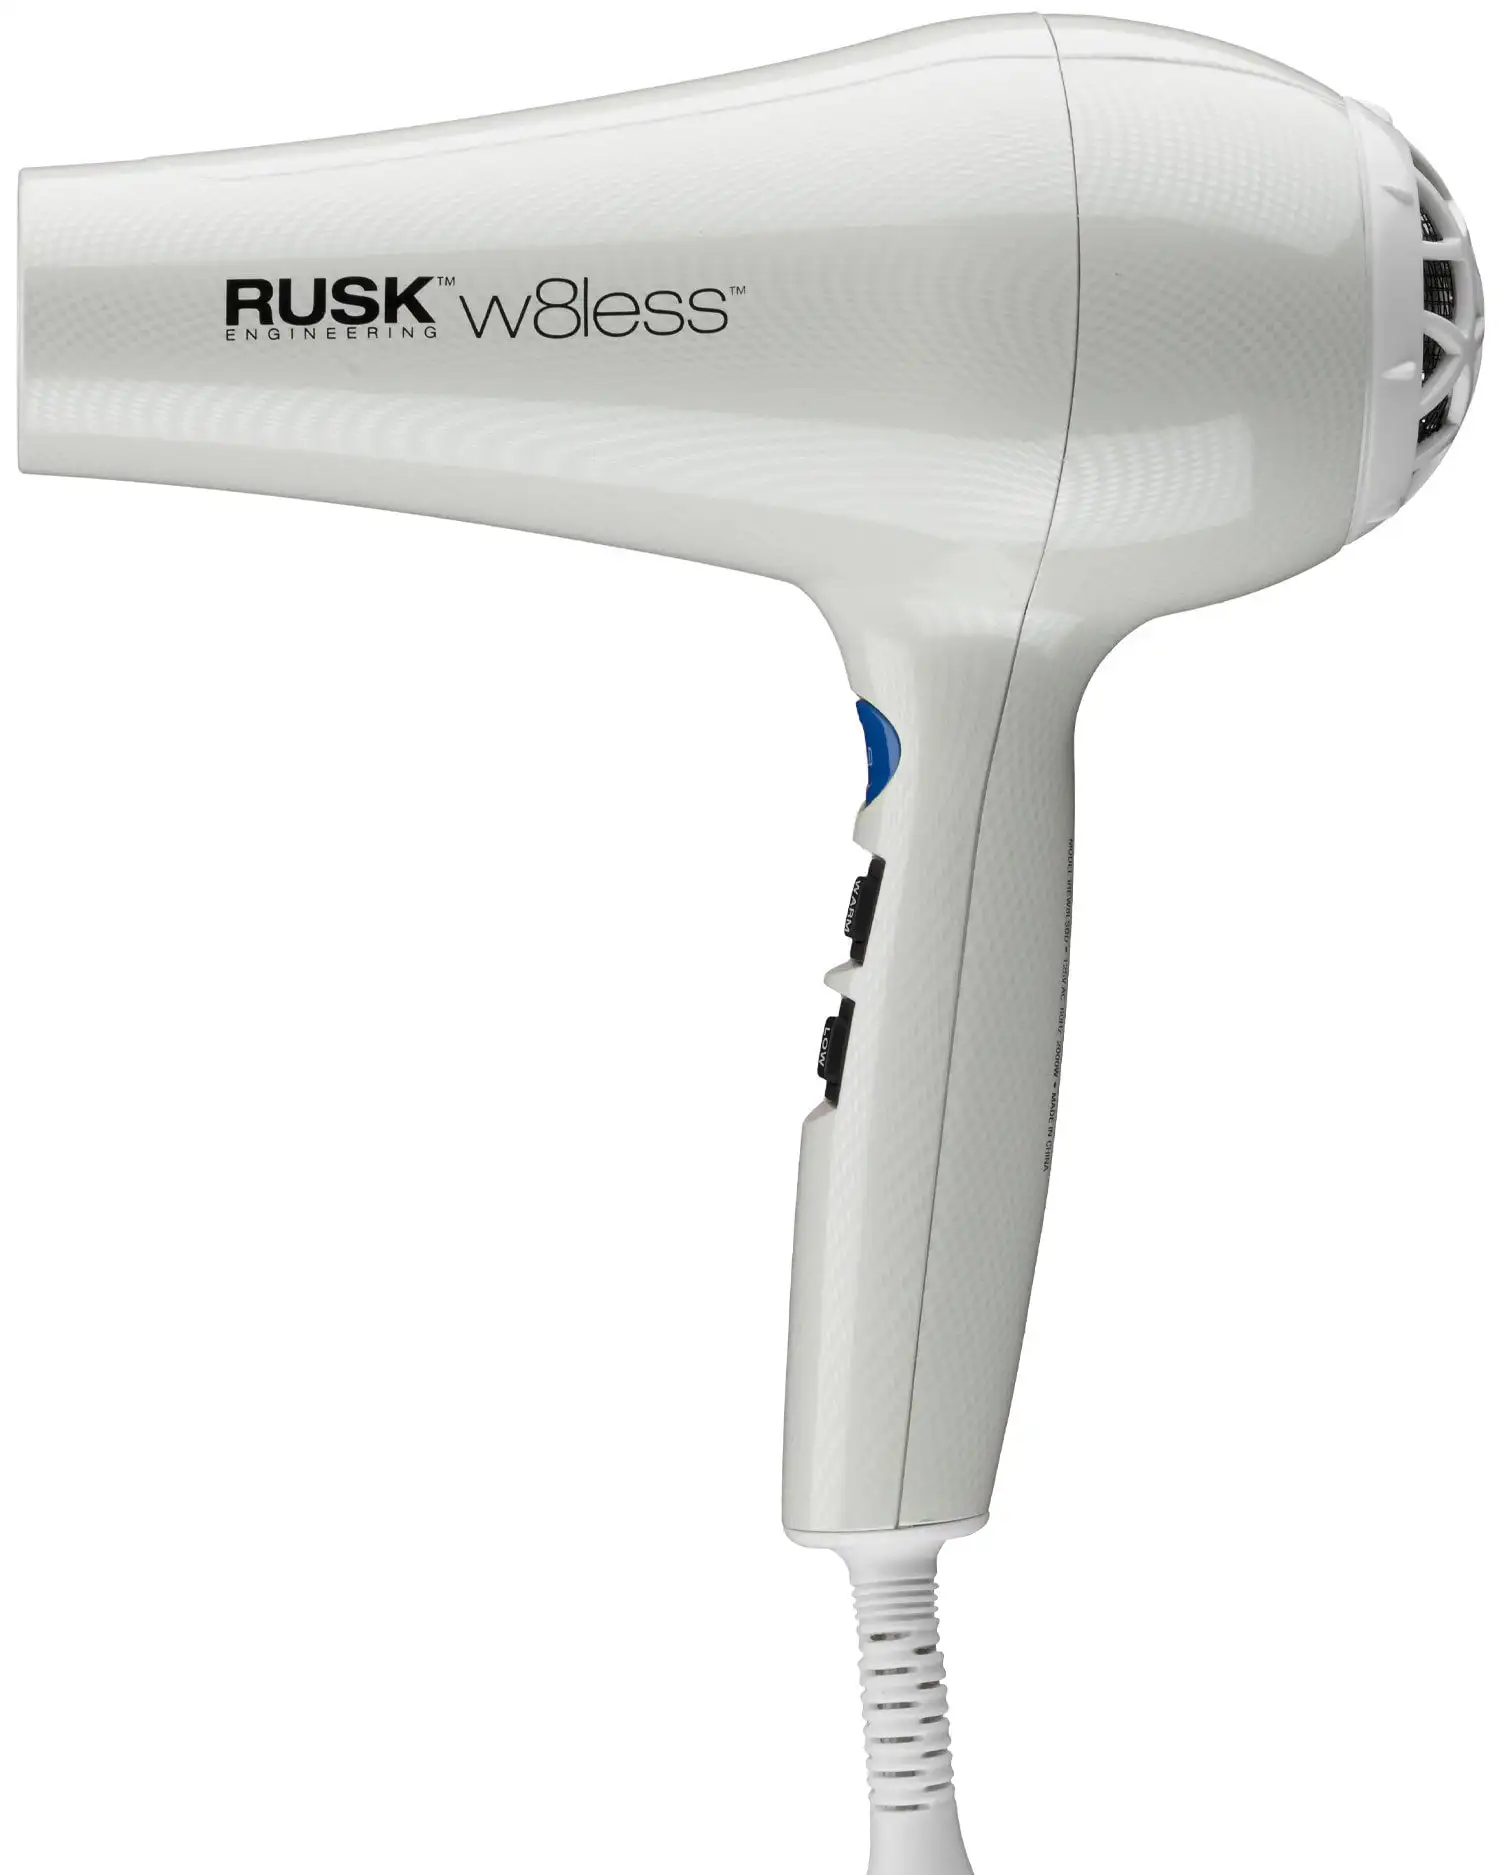 

Delivery within 7-10 daysRUSK Engineering W8less Professional 2000 Watt Hair Dryer